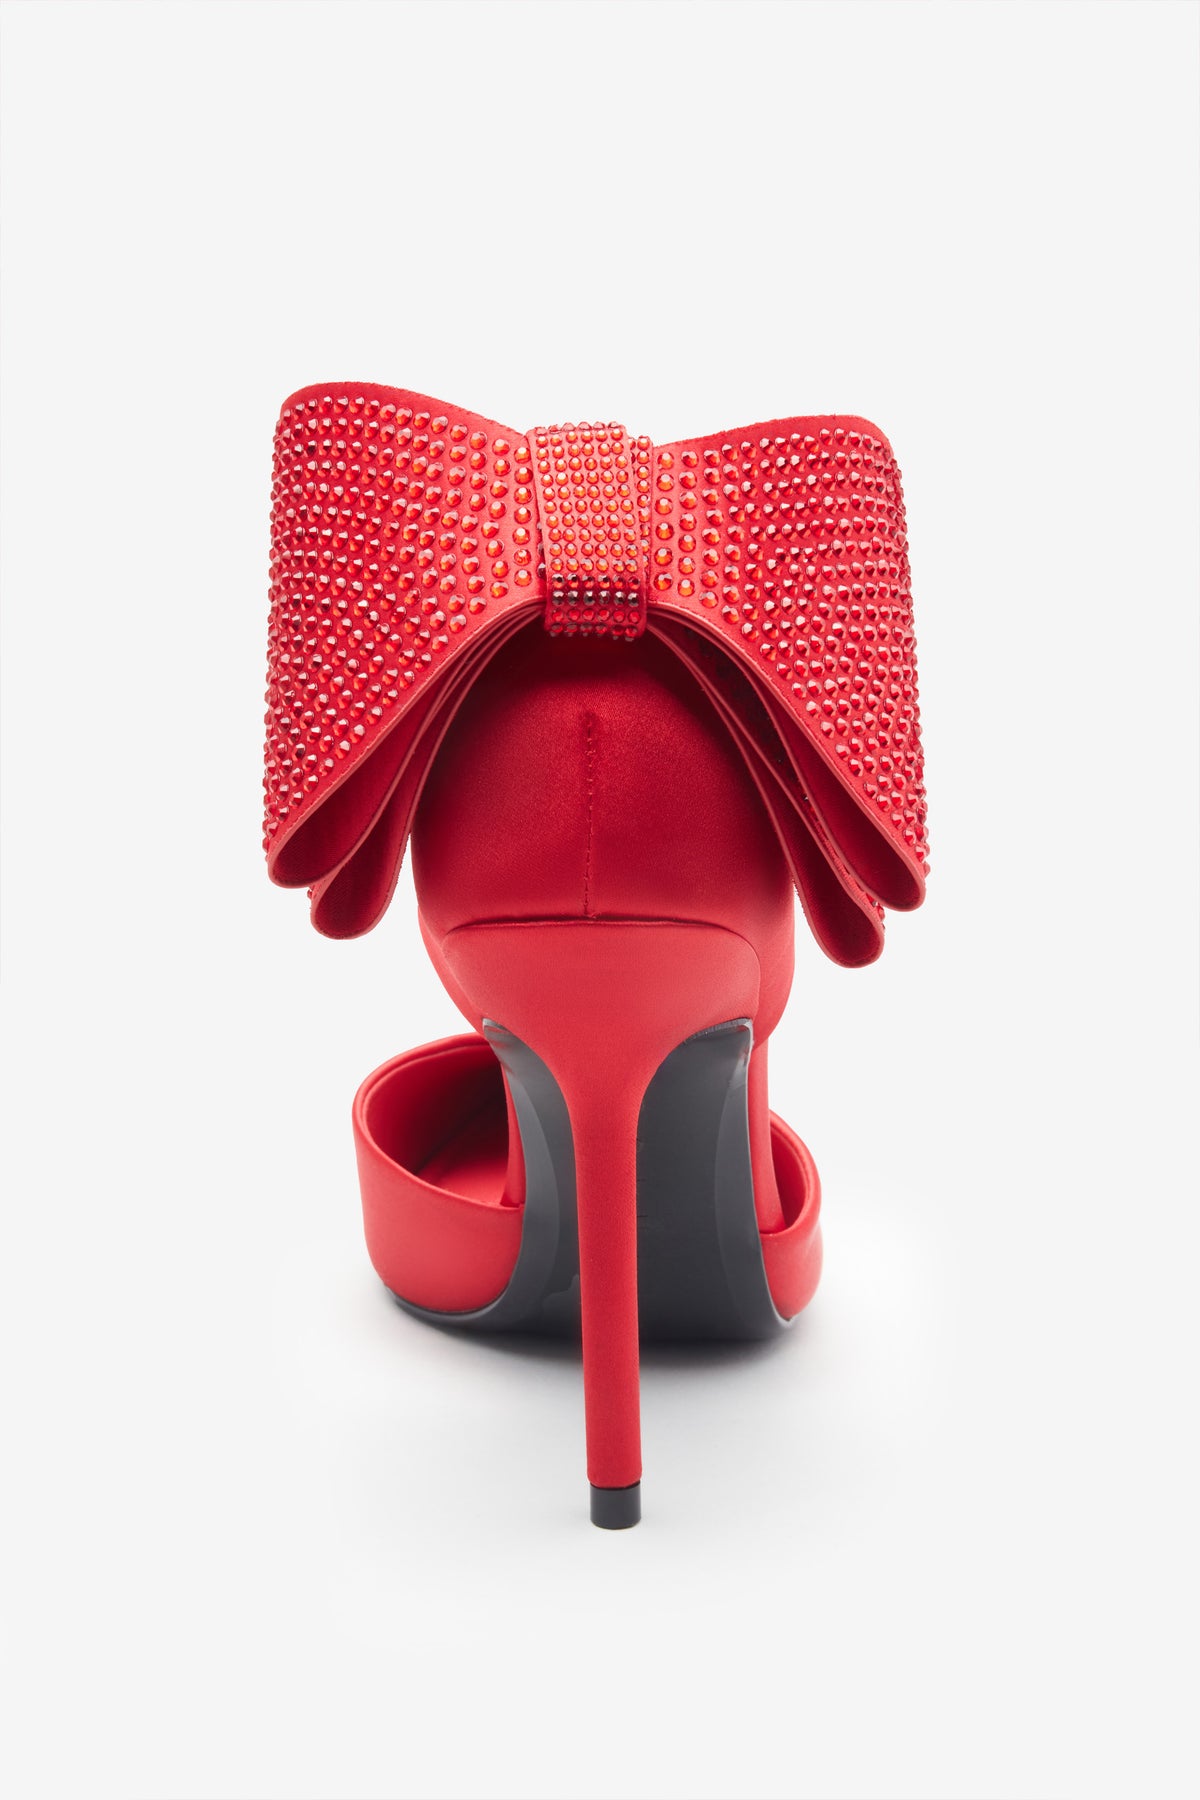 4-inch Open Toe Ankle Strap Red Heels with Bow | Bella Belle